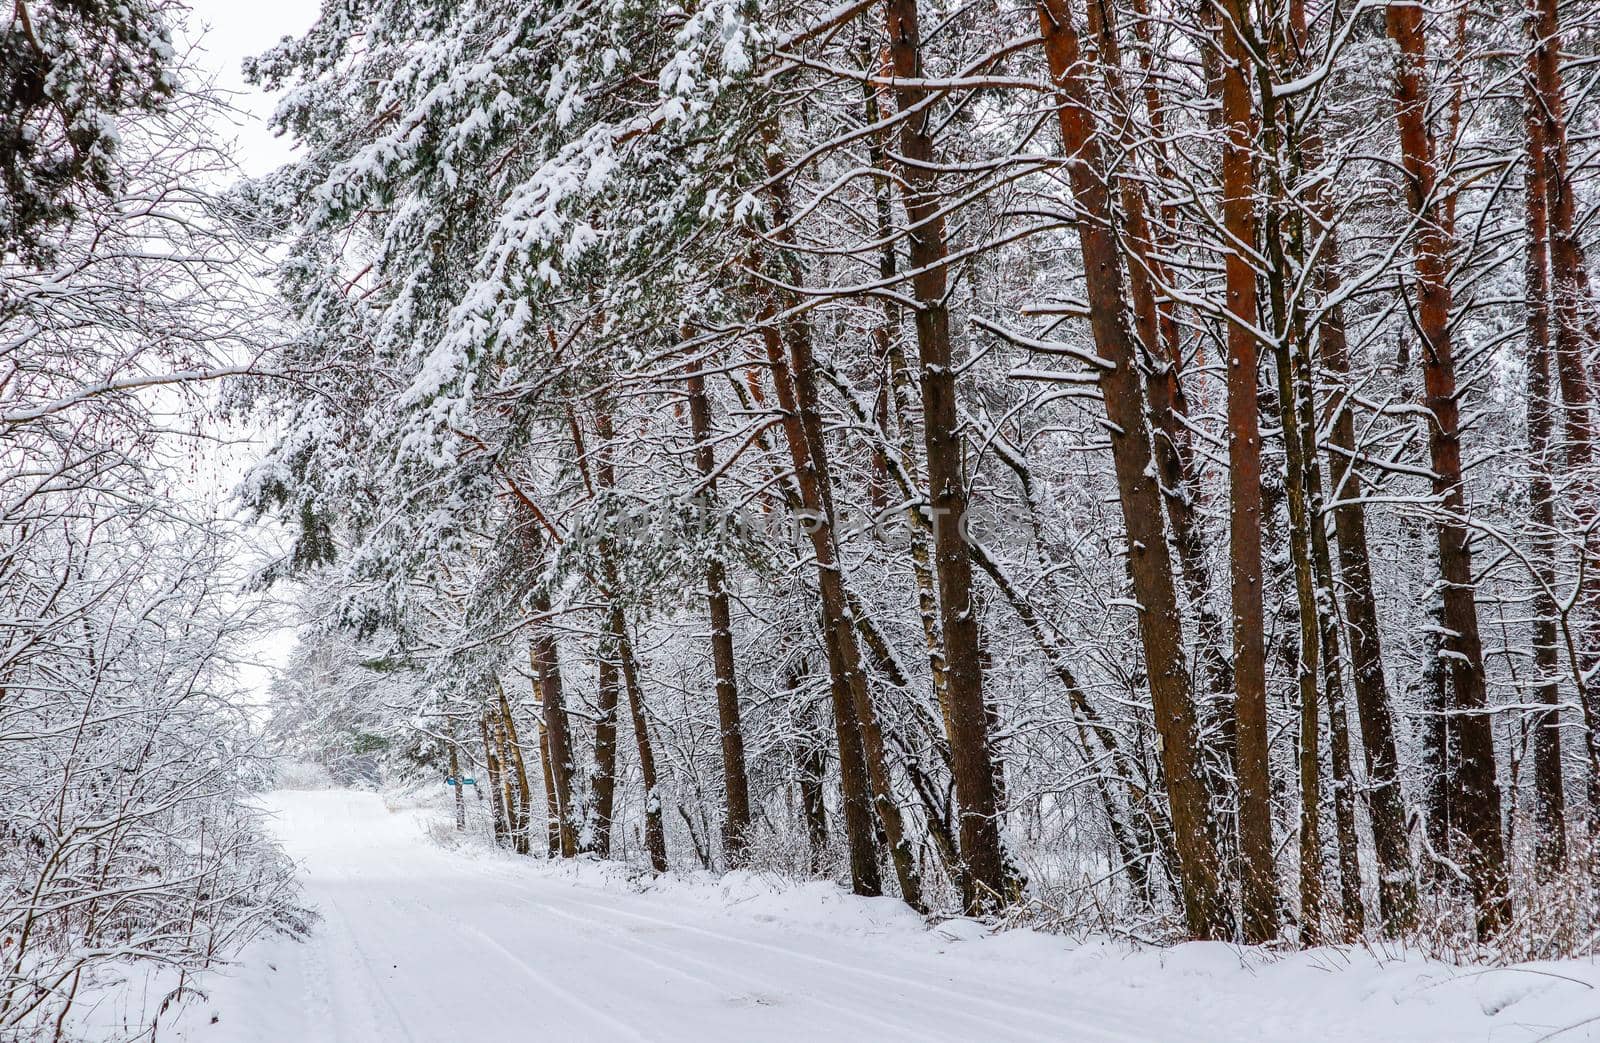 Beautiful winter forest with snowy trees and a white snowy road. Fairy tale.